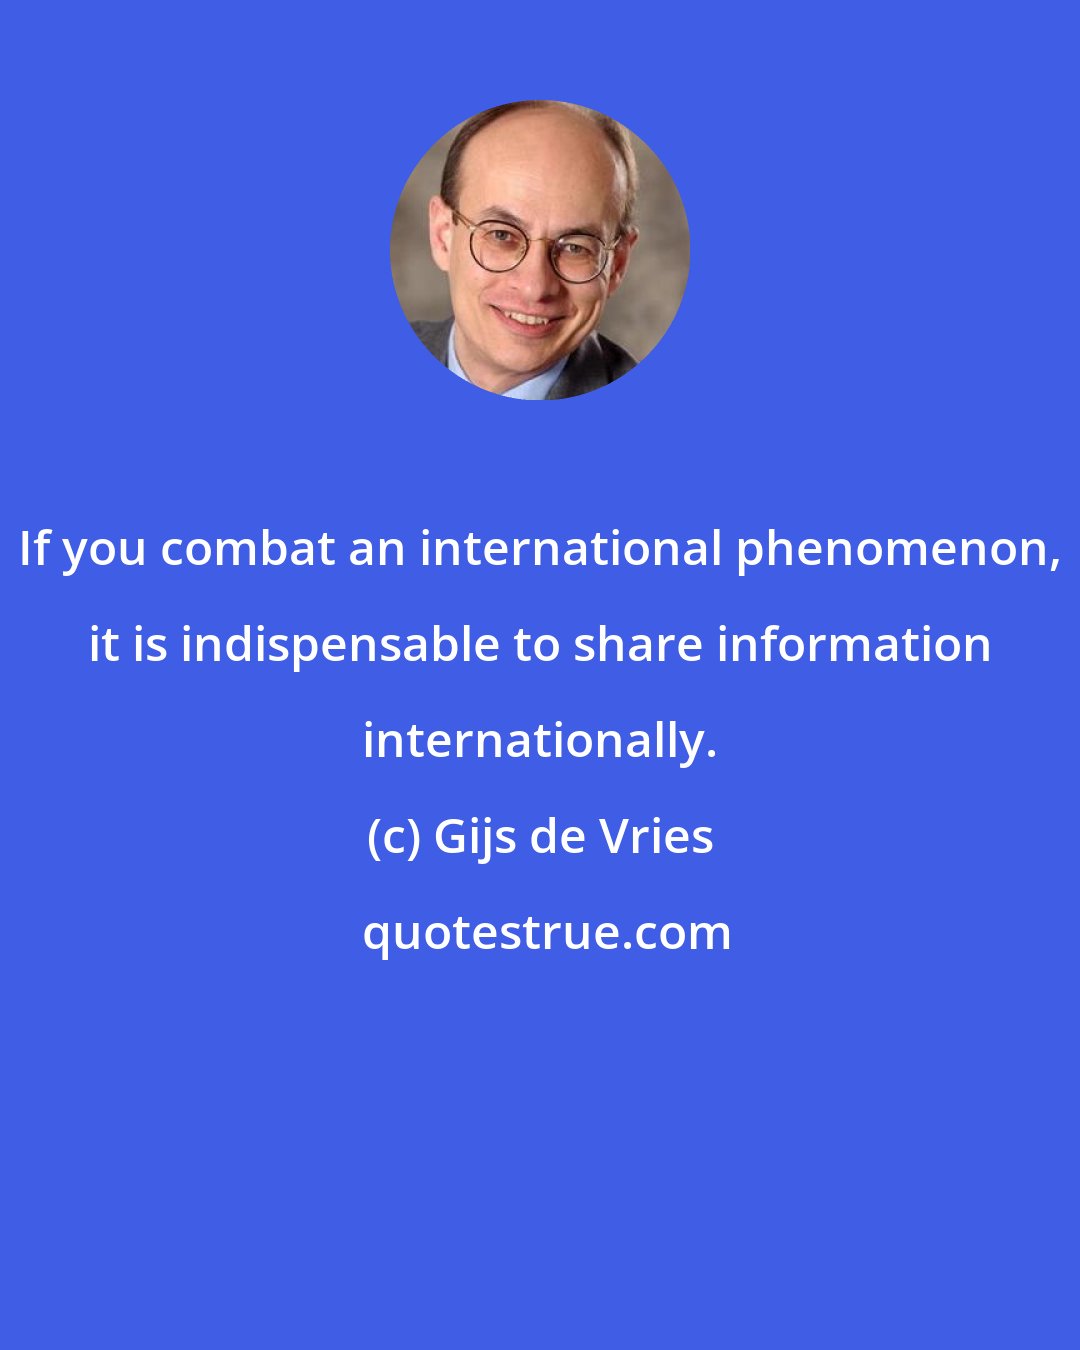 Gijs de Vries: If you combat an international phenomenon, it is indispensable to share information internationally.